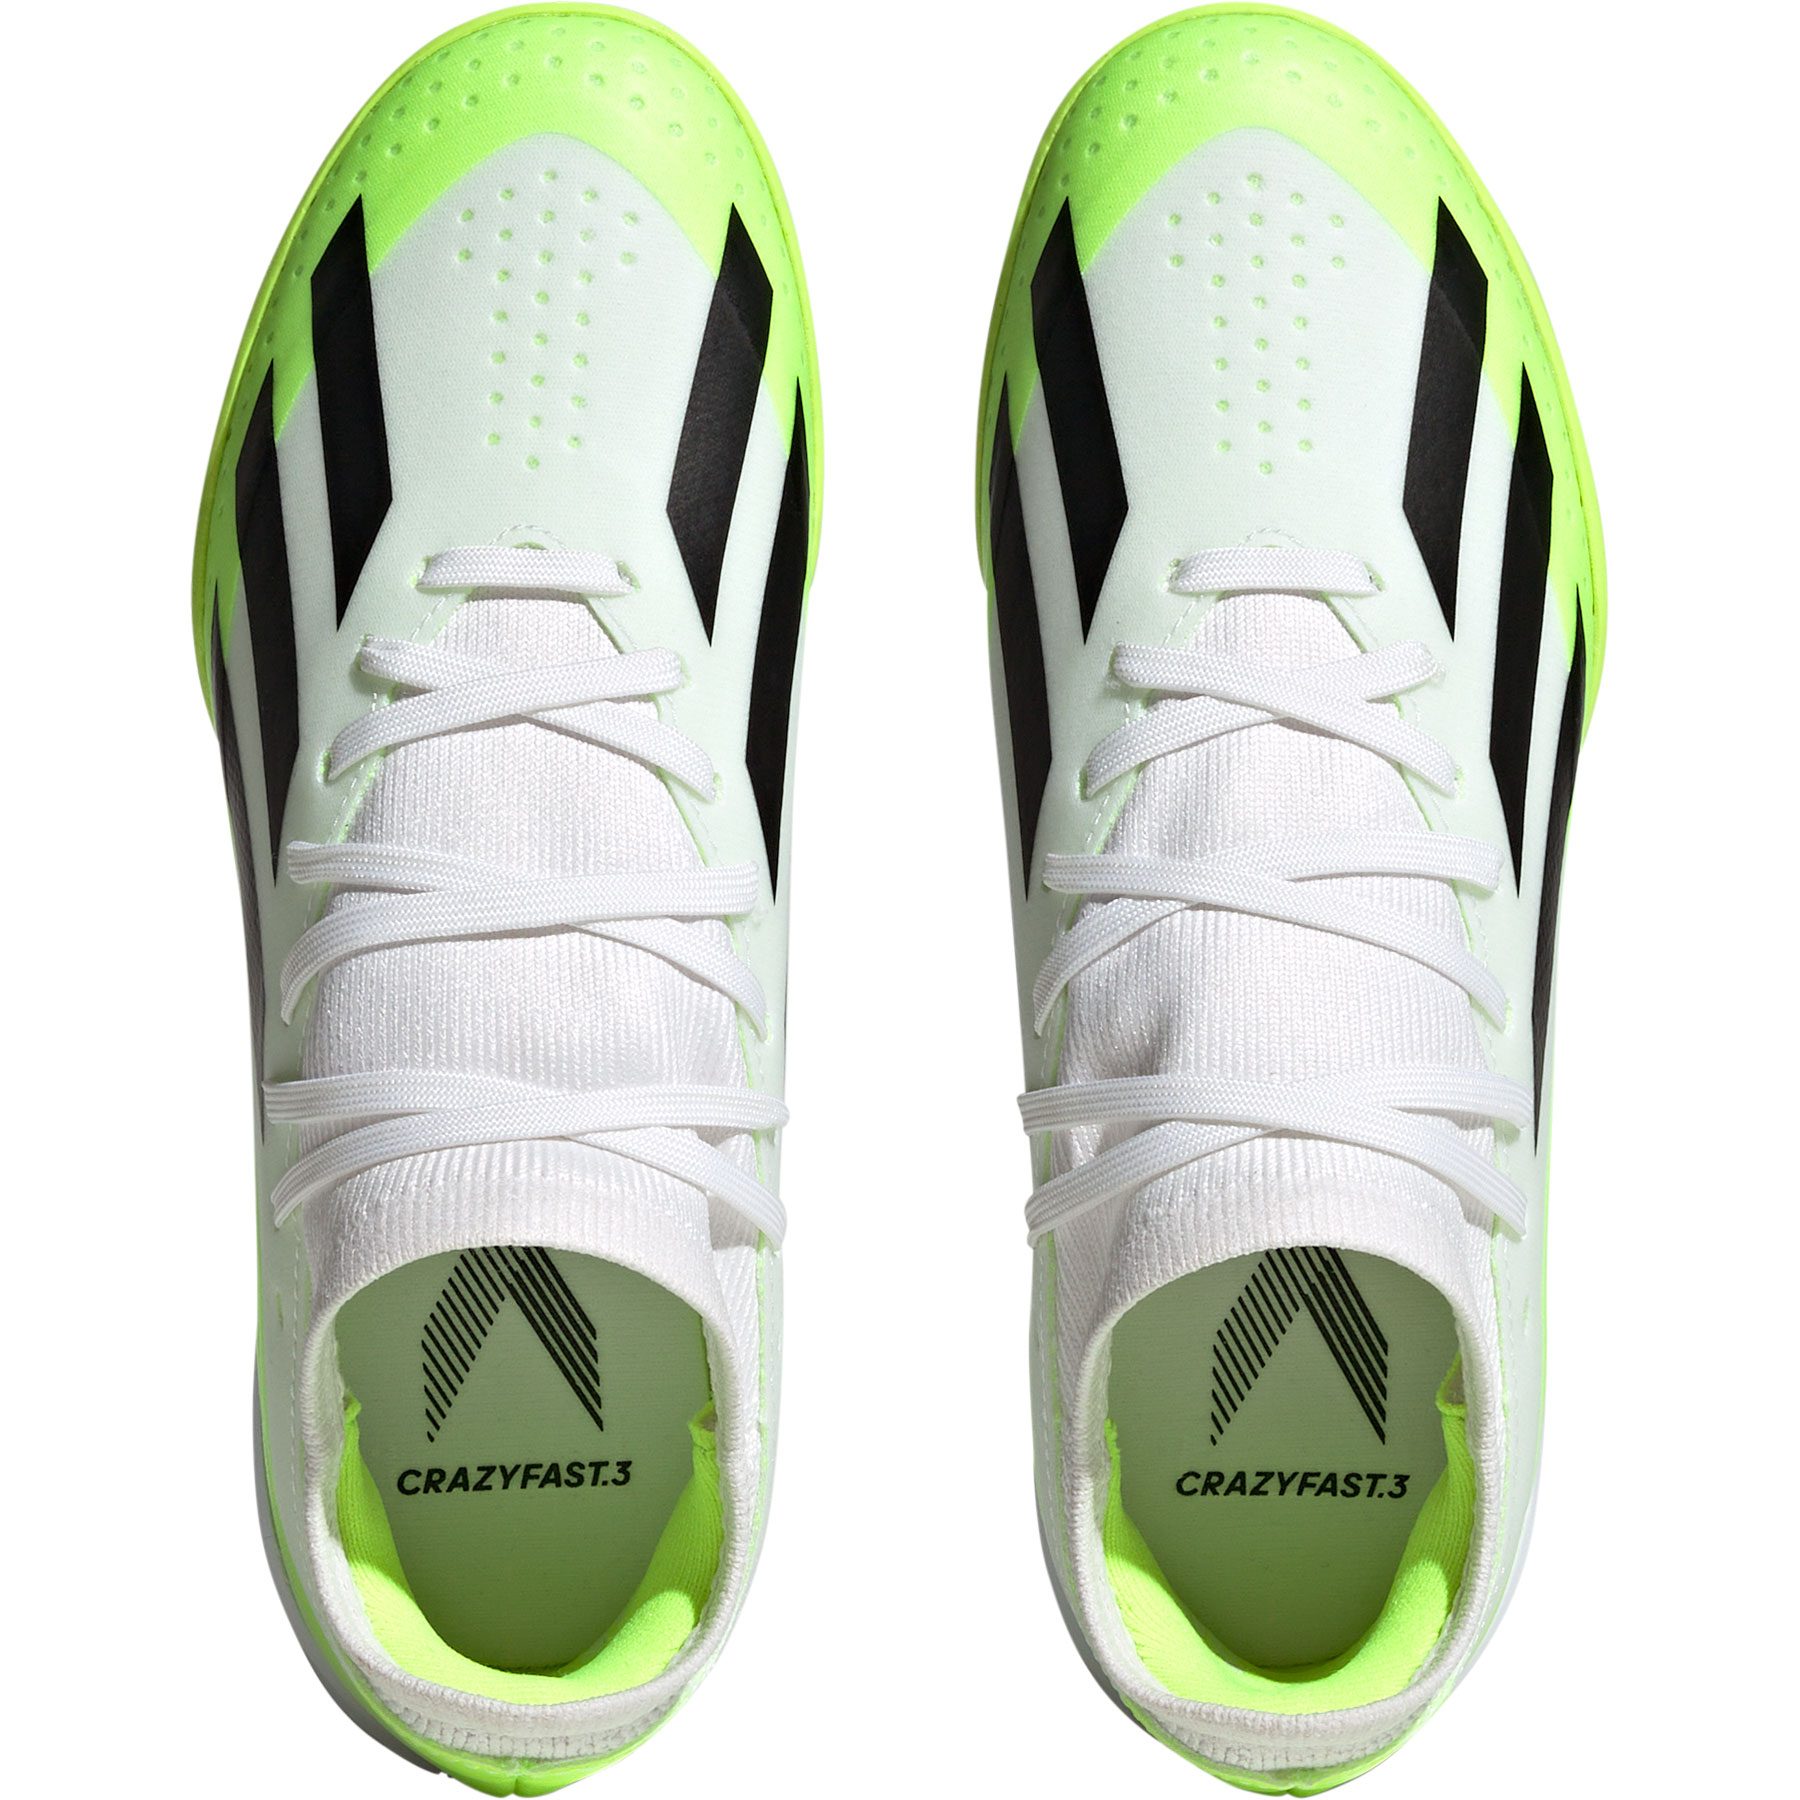 Shop X Bittl Crazyfast.3 IN adidas white at - Football football Kids Shoes Sport